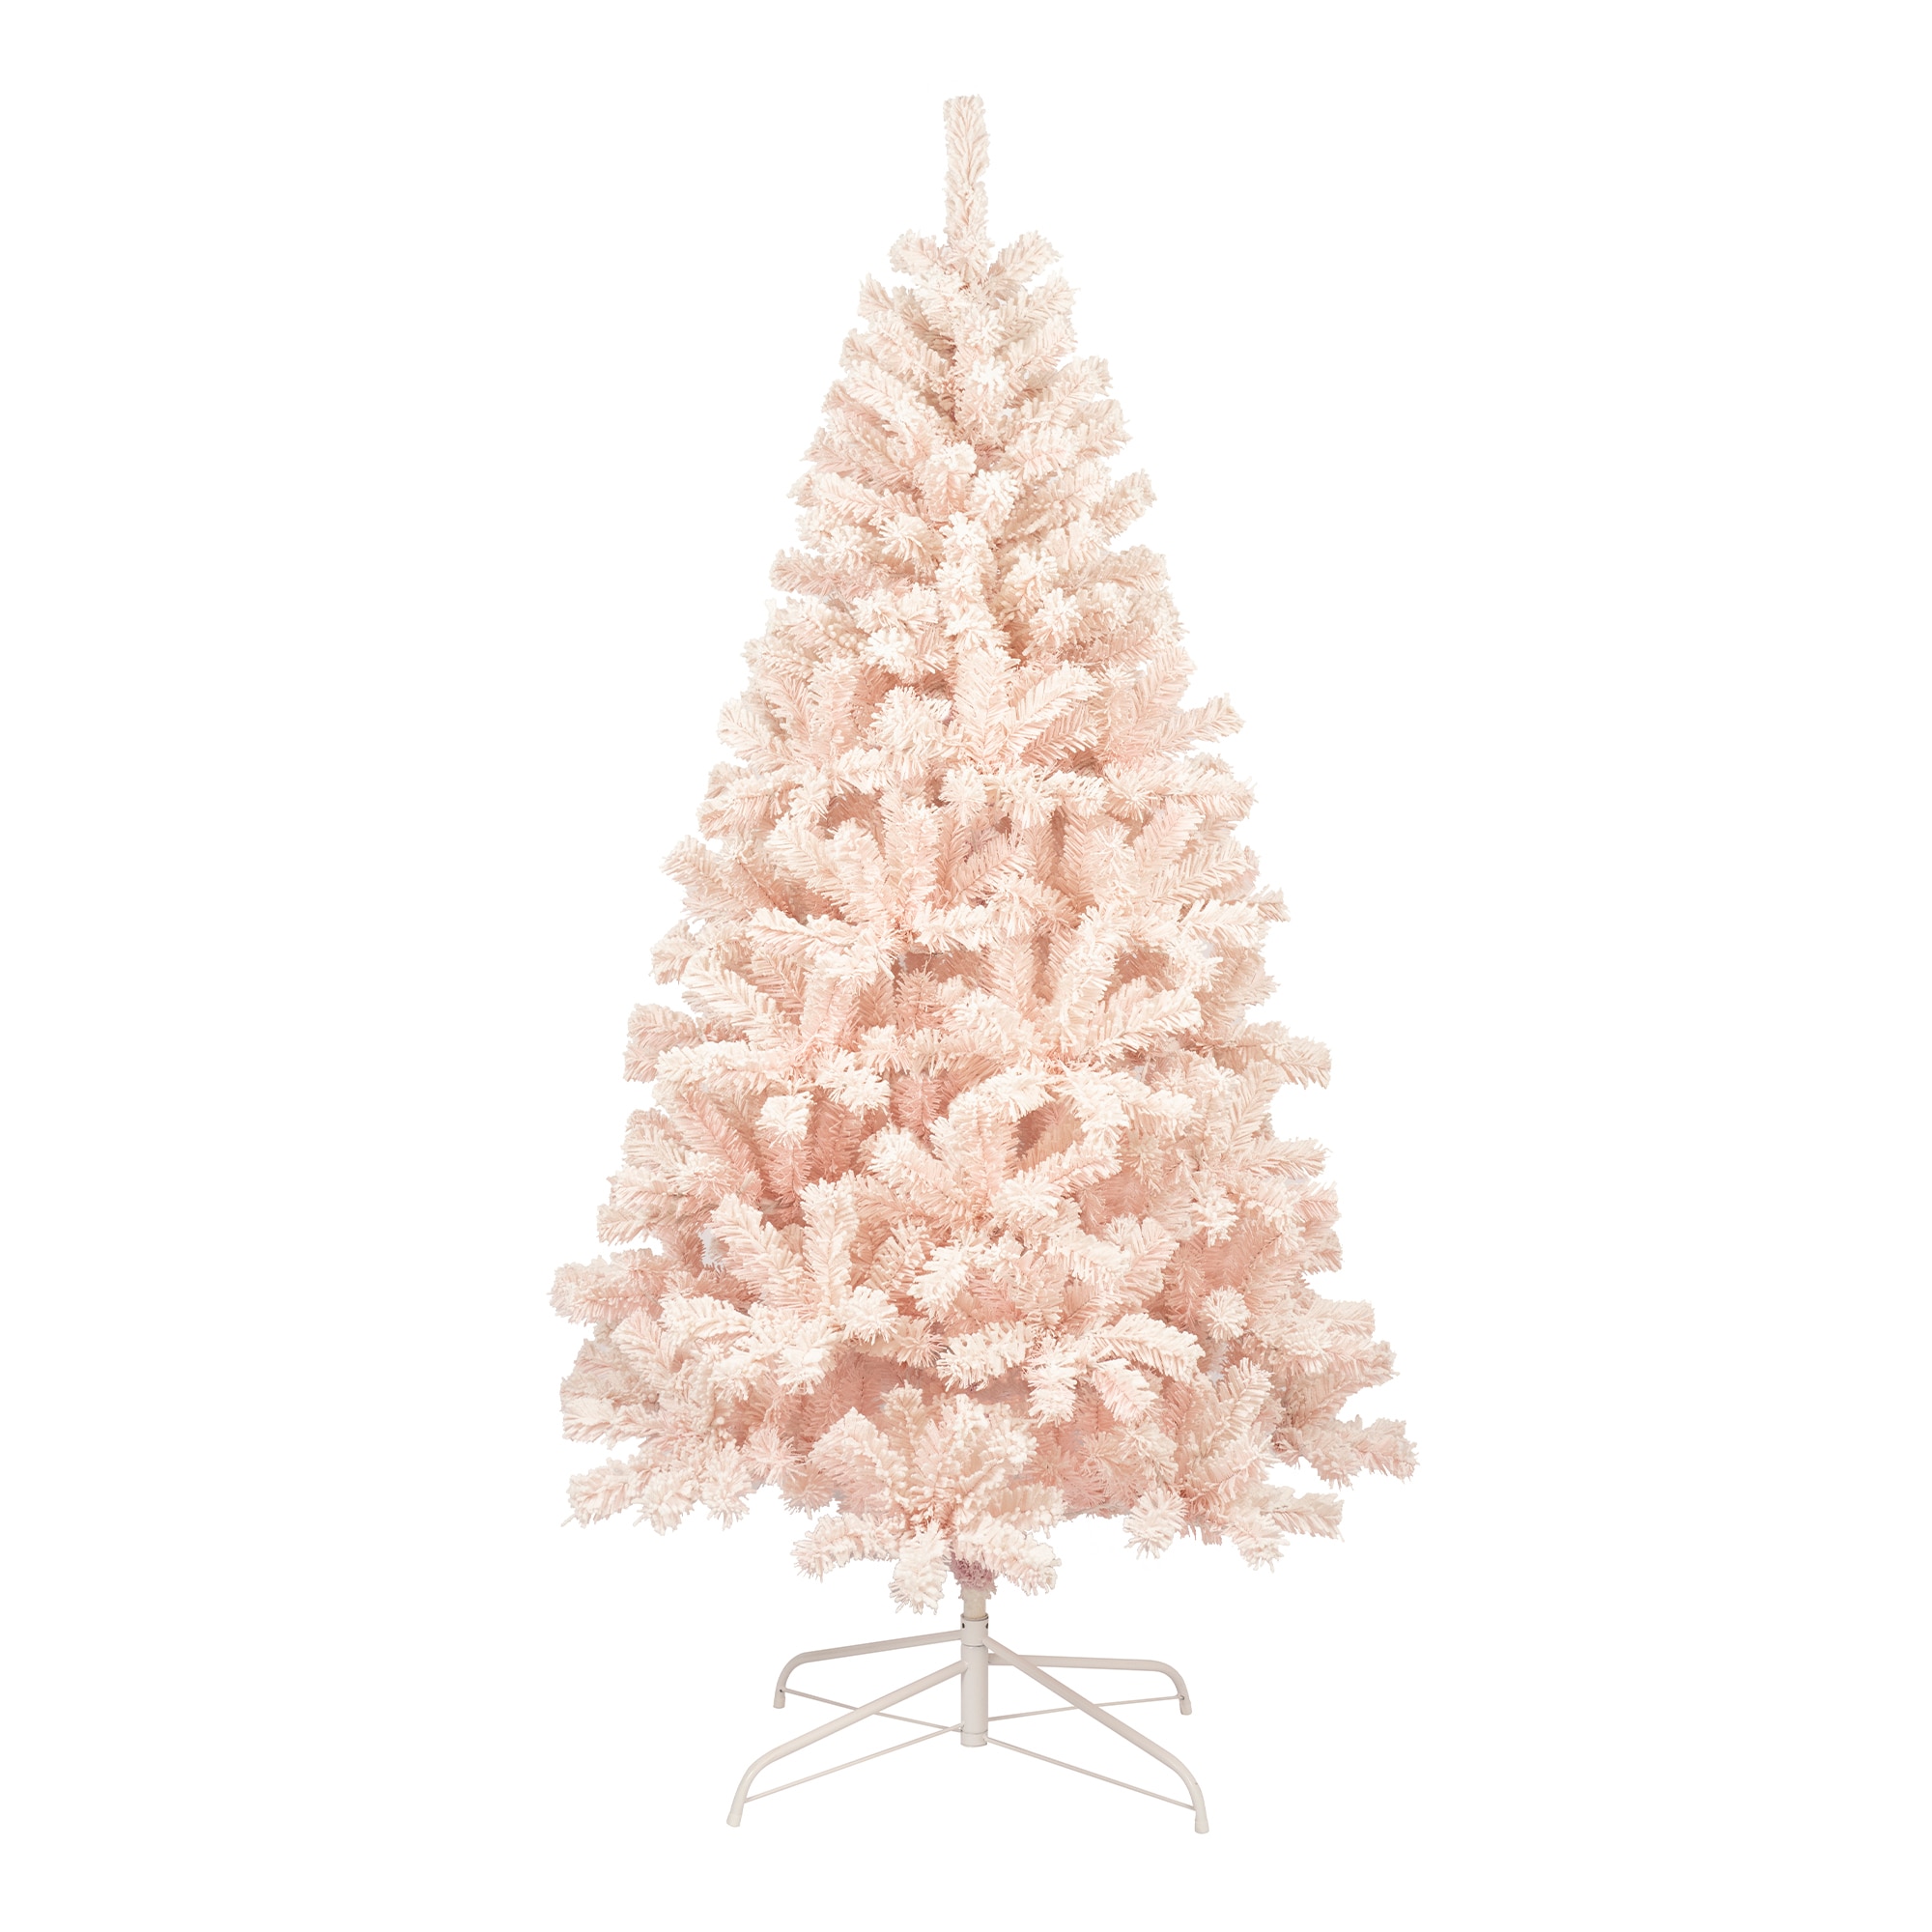 WELLFOR 6-ft Pre-lit Flocked Pink Artificial Christmas Tree with LED ...